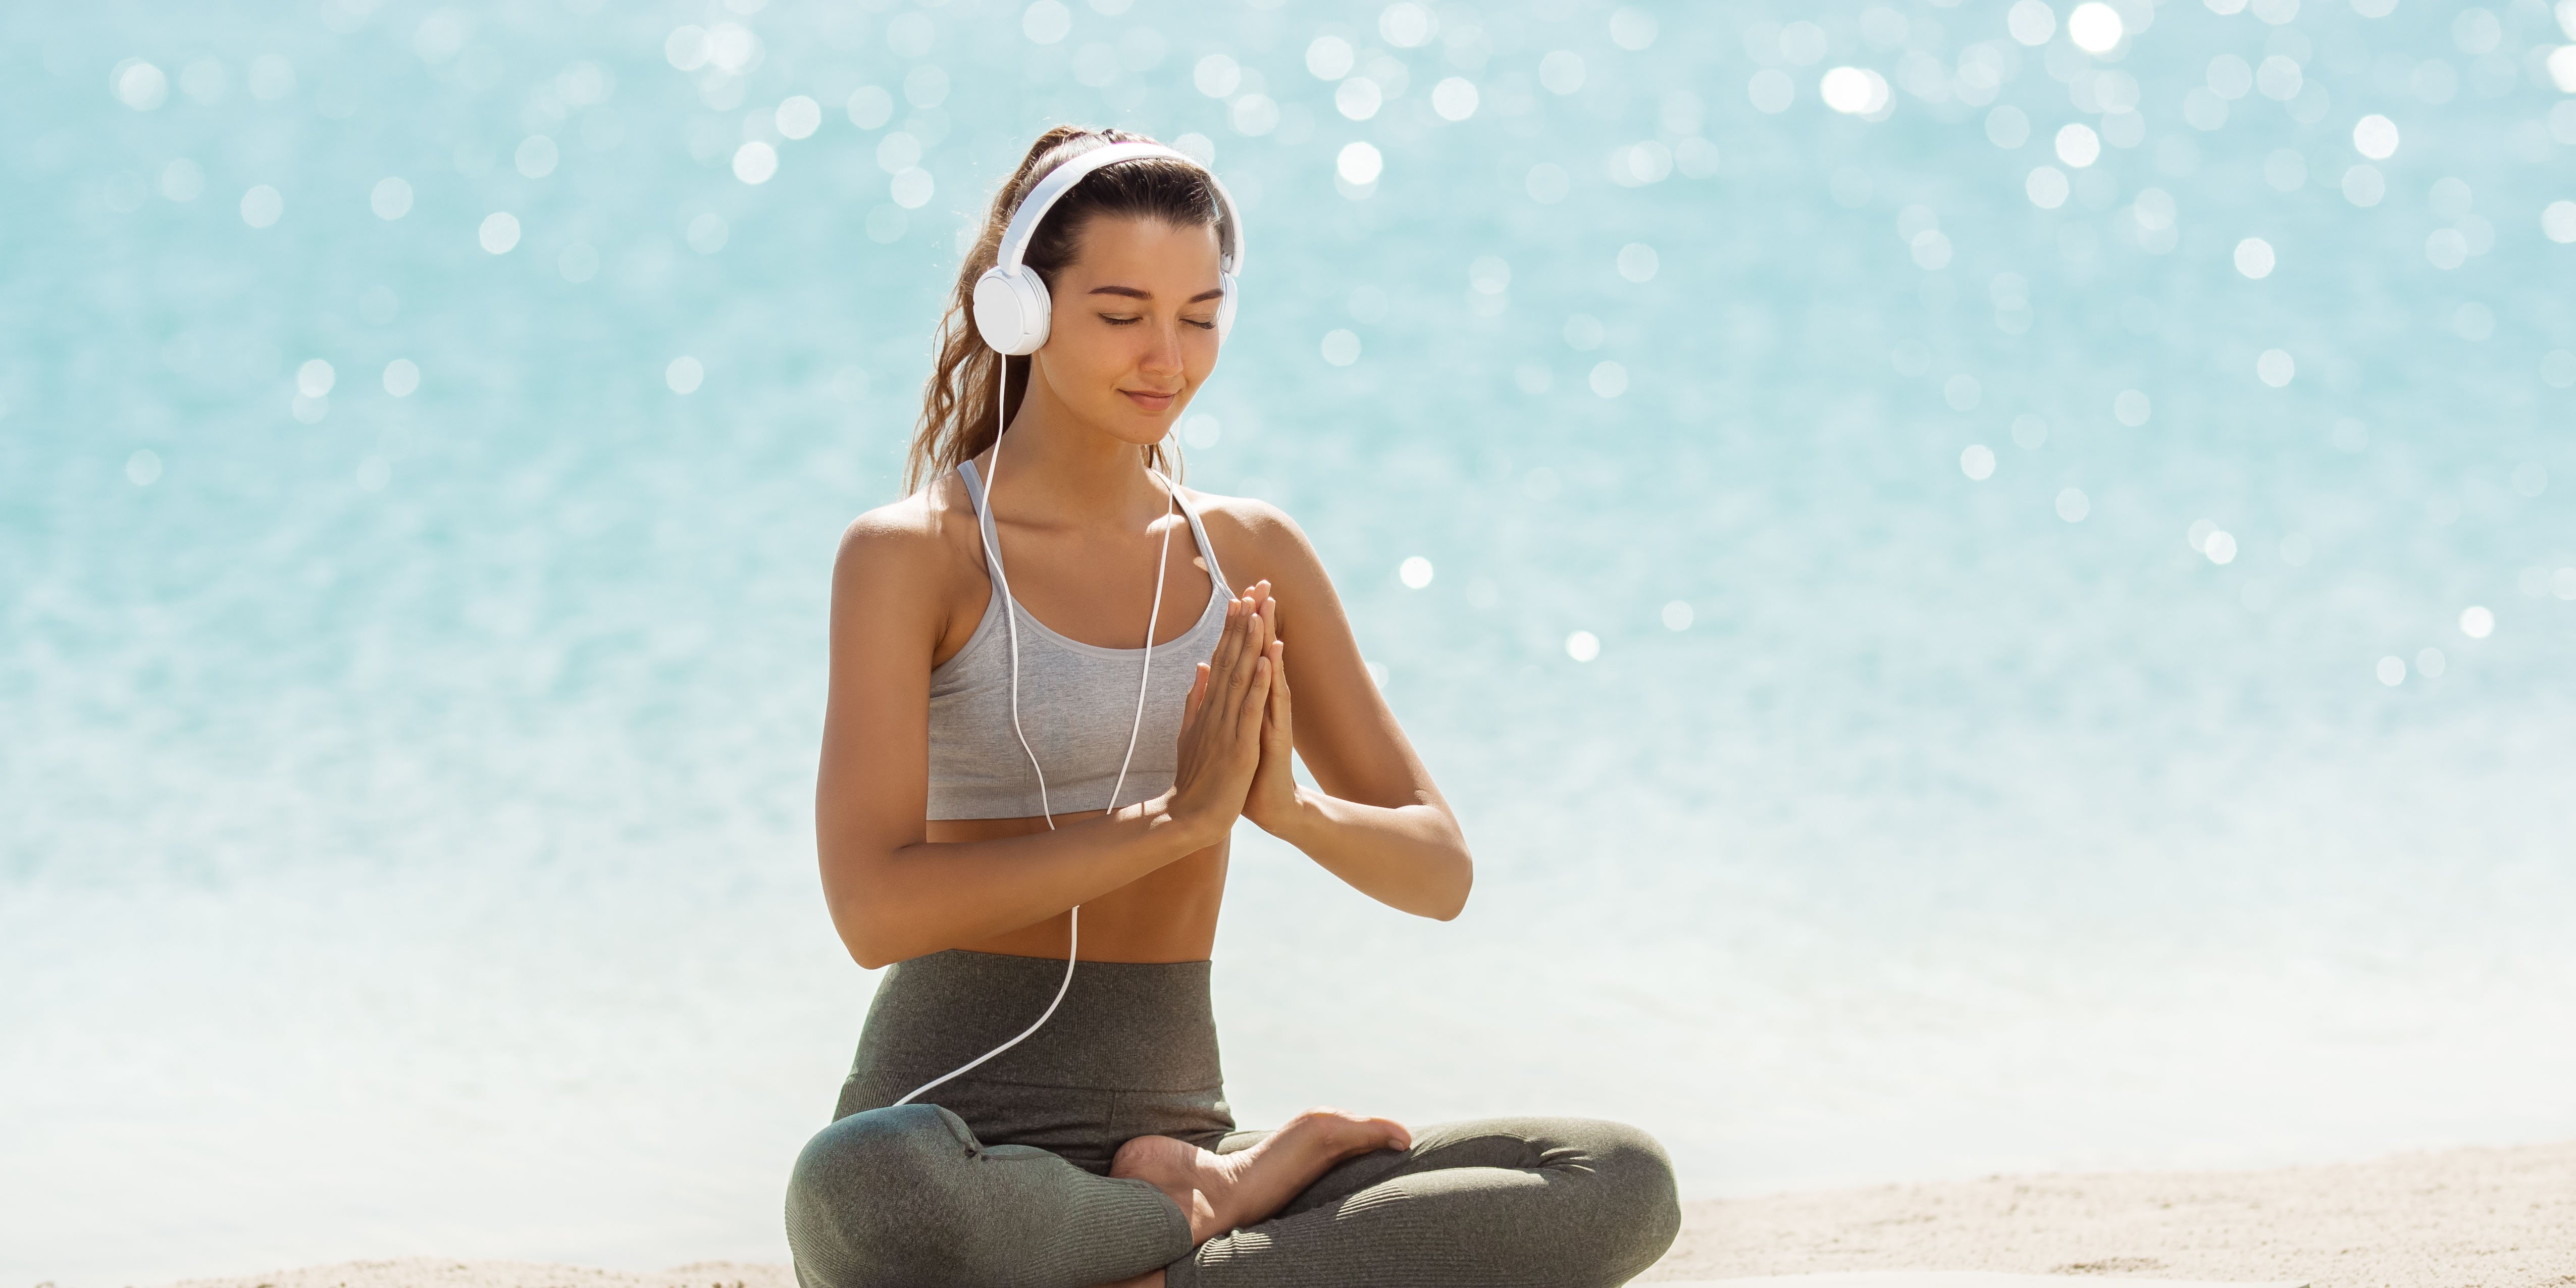 woman-in-yoga-meditation-pose-with-headphones-on-listening-to-yoga-music-2-1